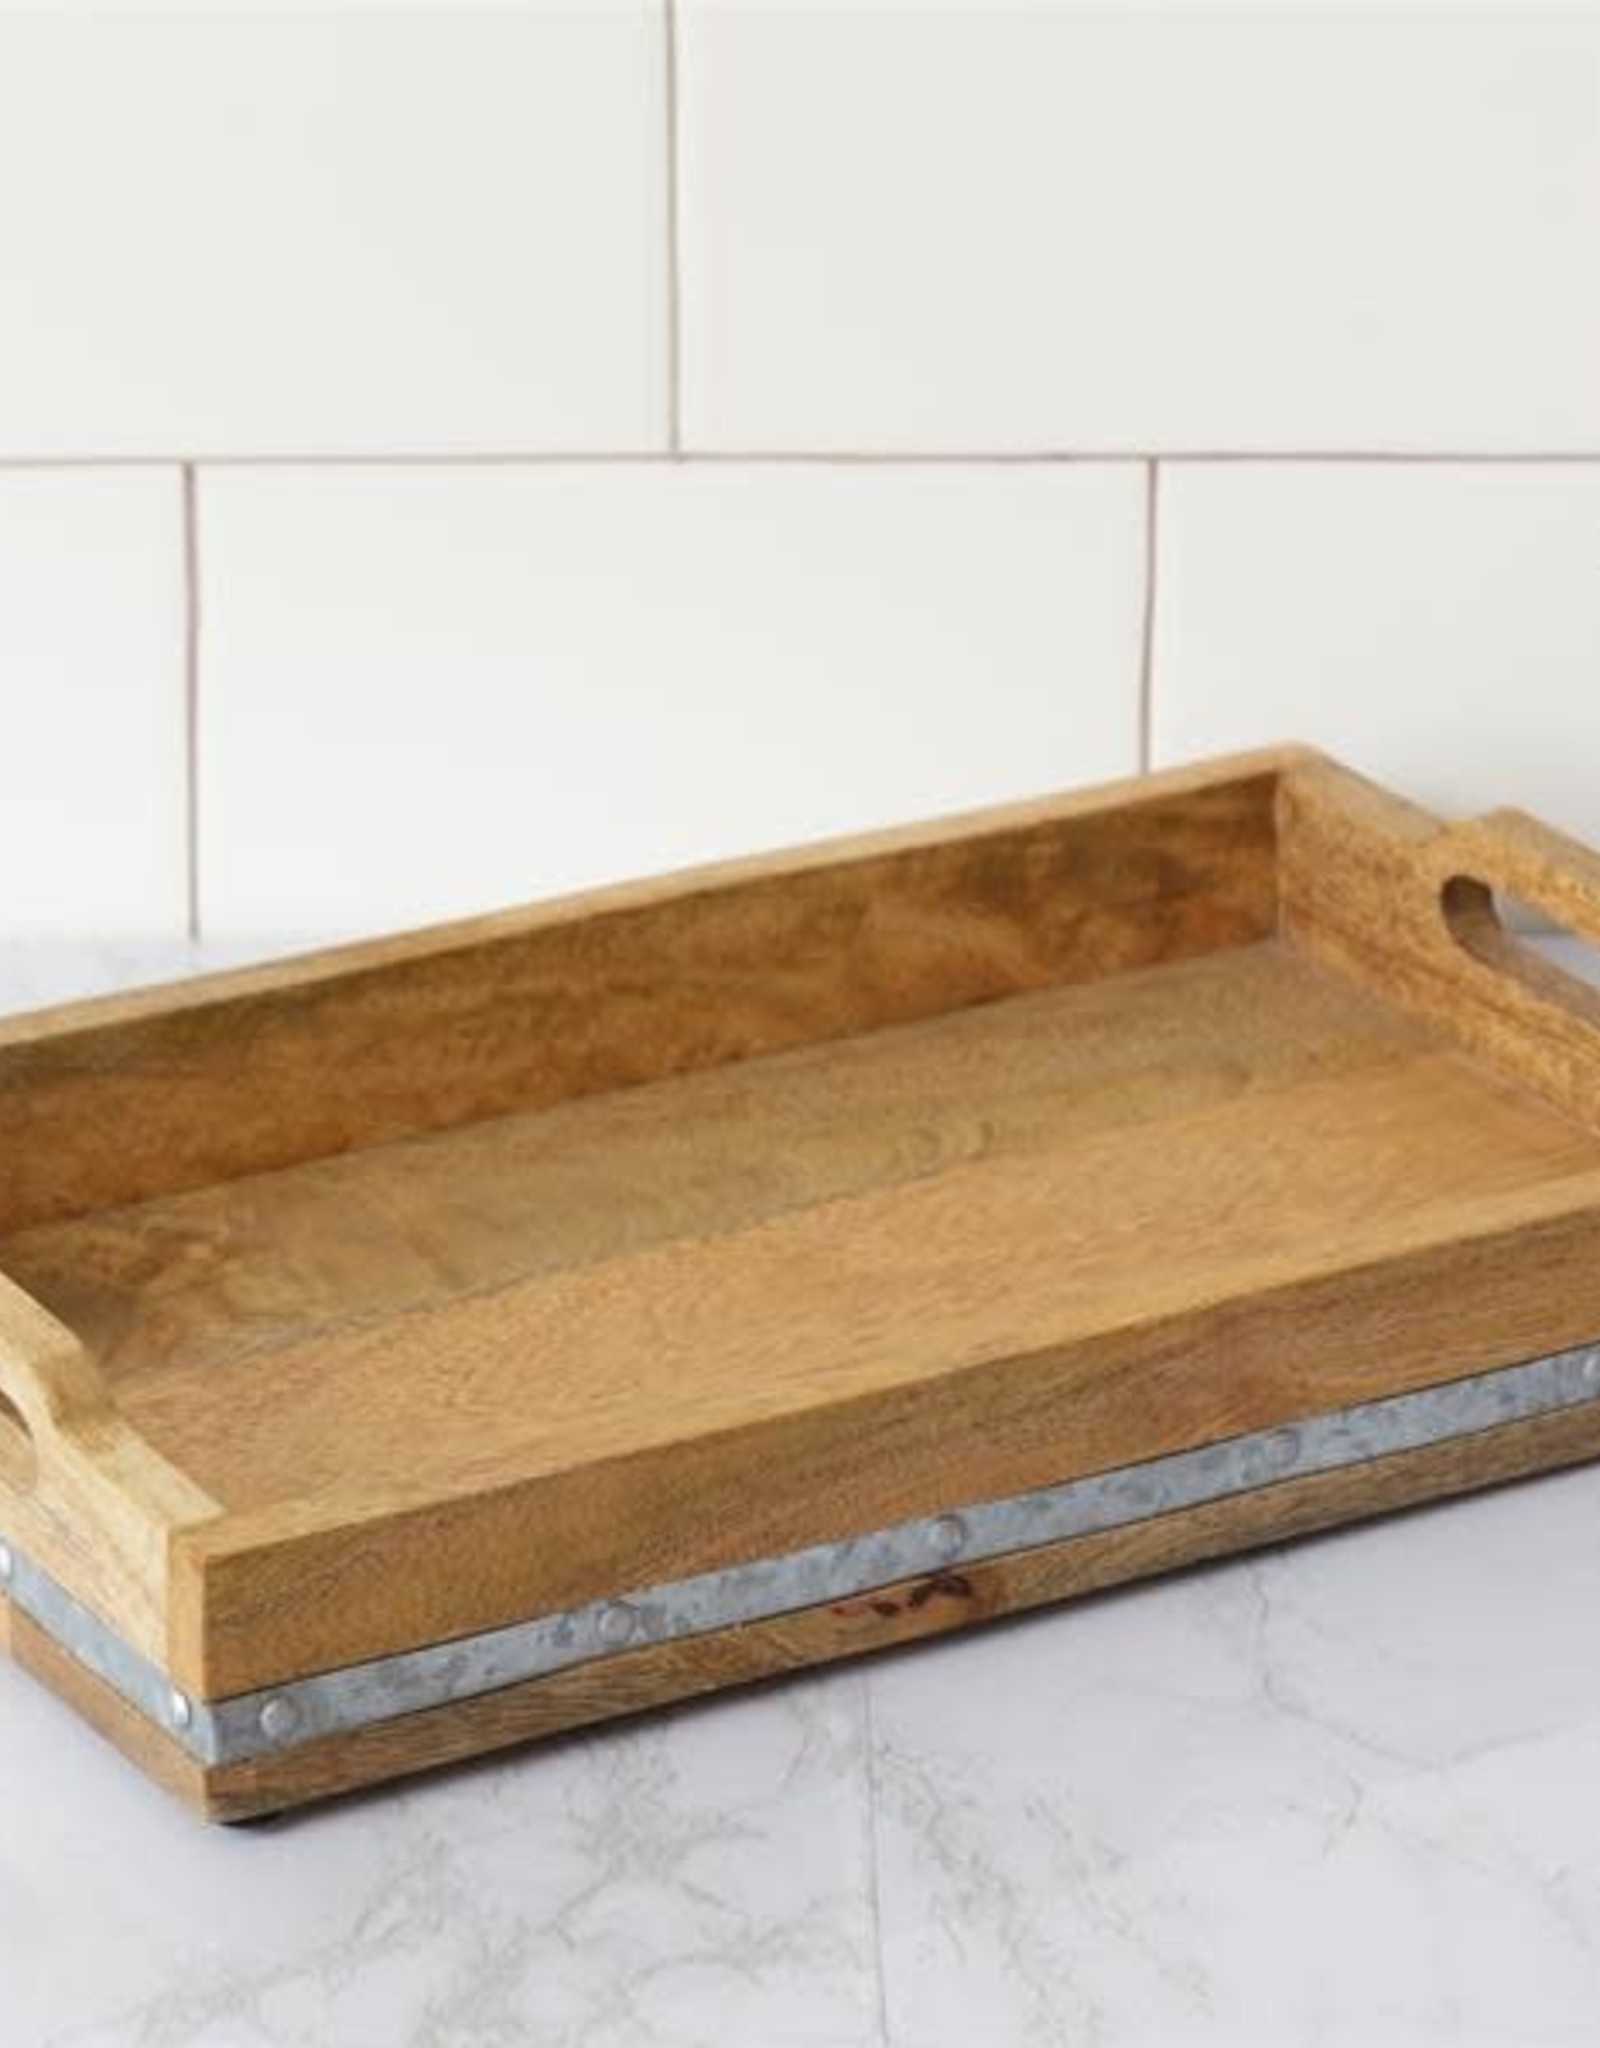 Tray - Wood With Metal Embellishment